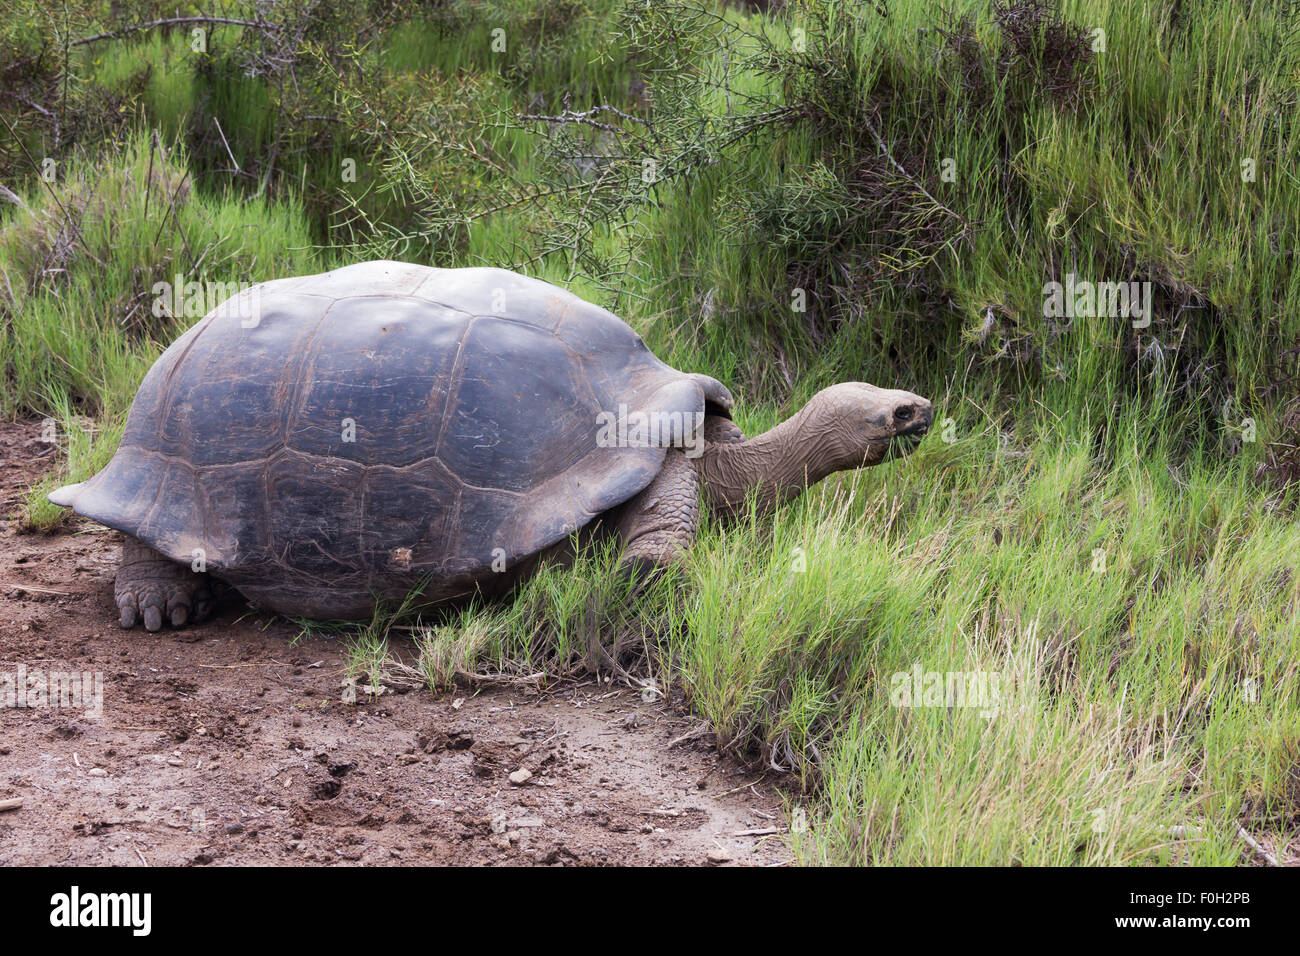 Galapagos tortoise with scratched shell eating grass Stock Photo